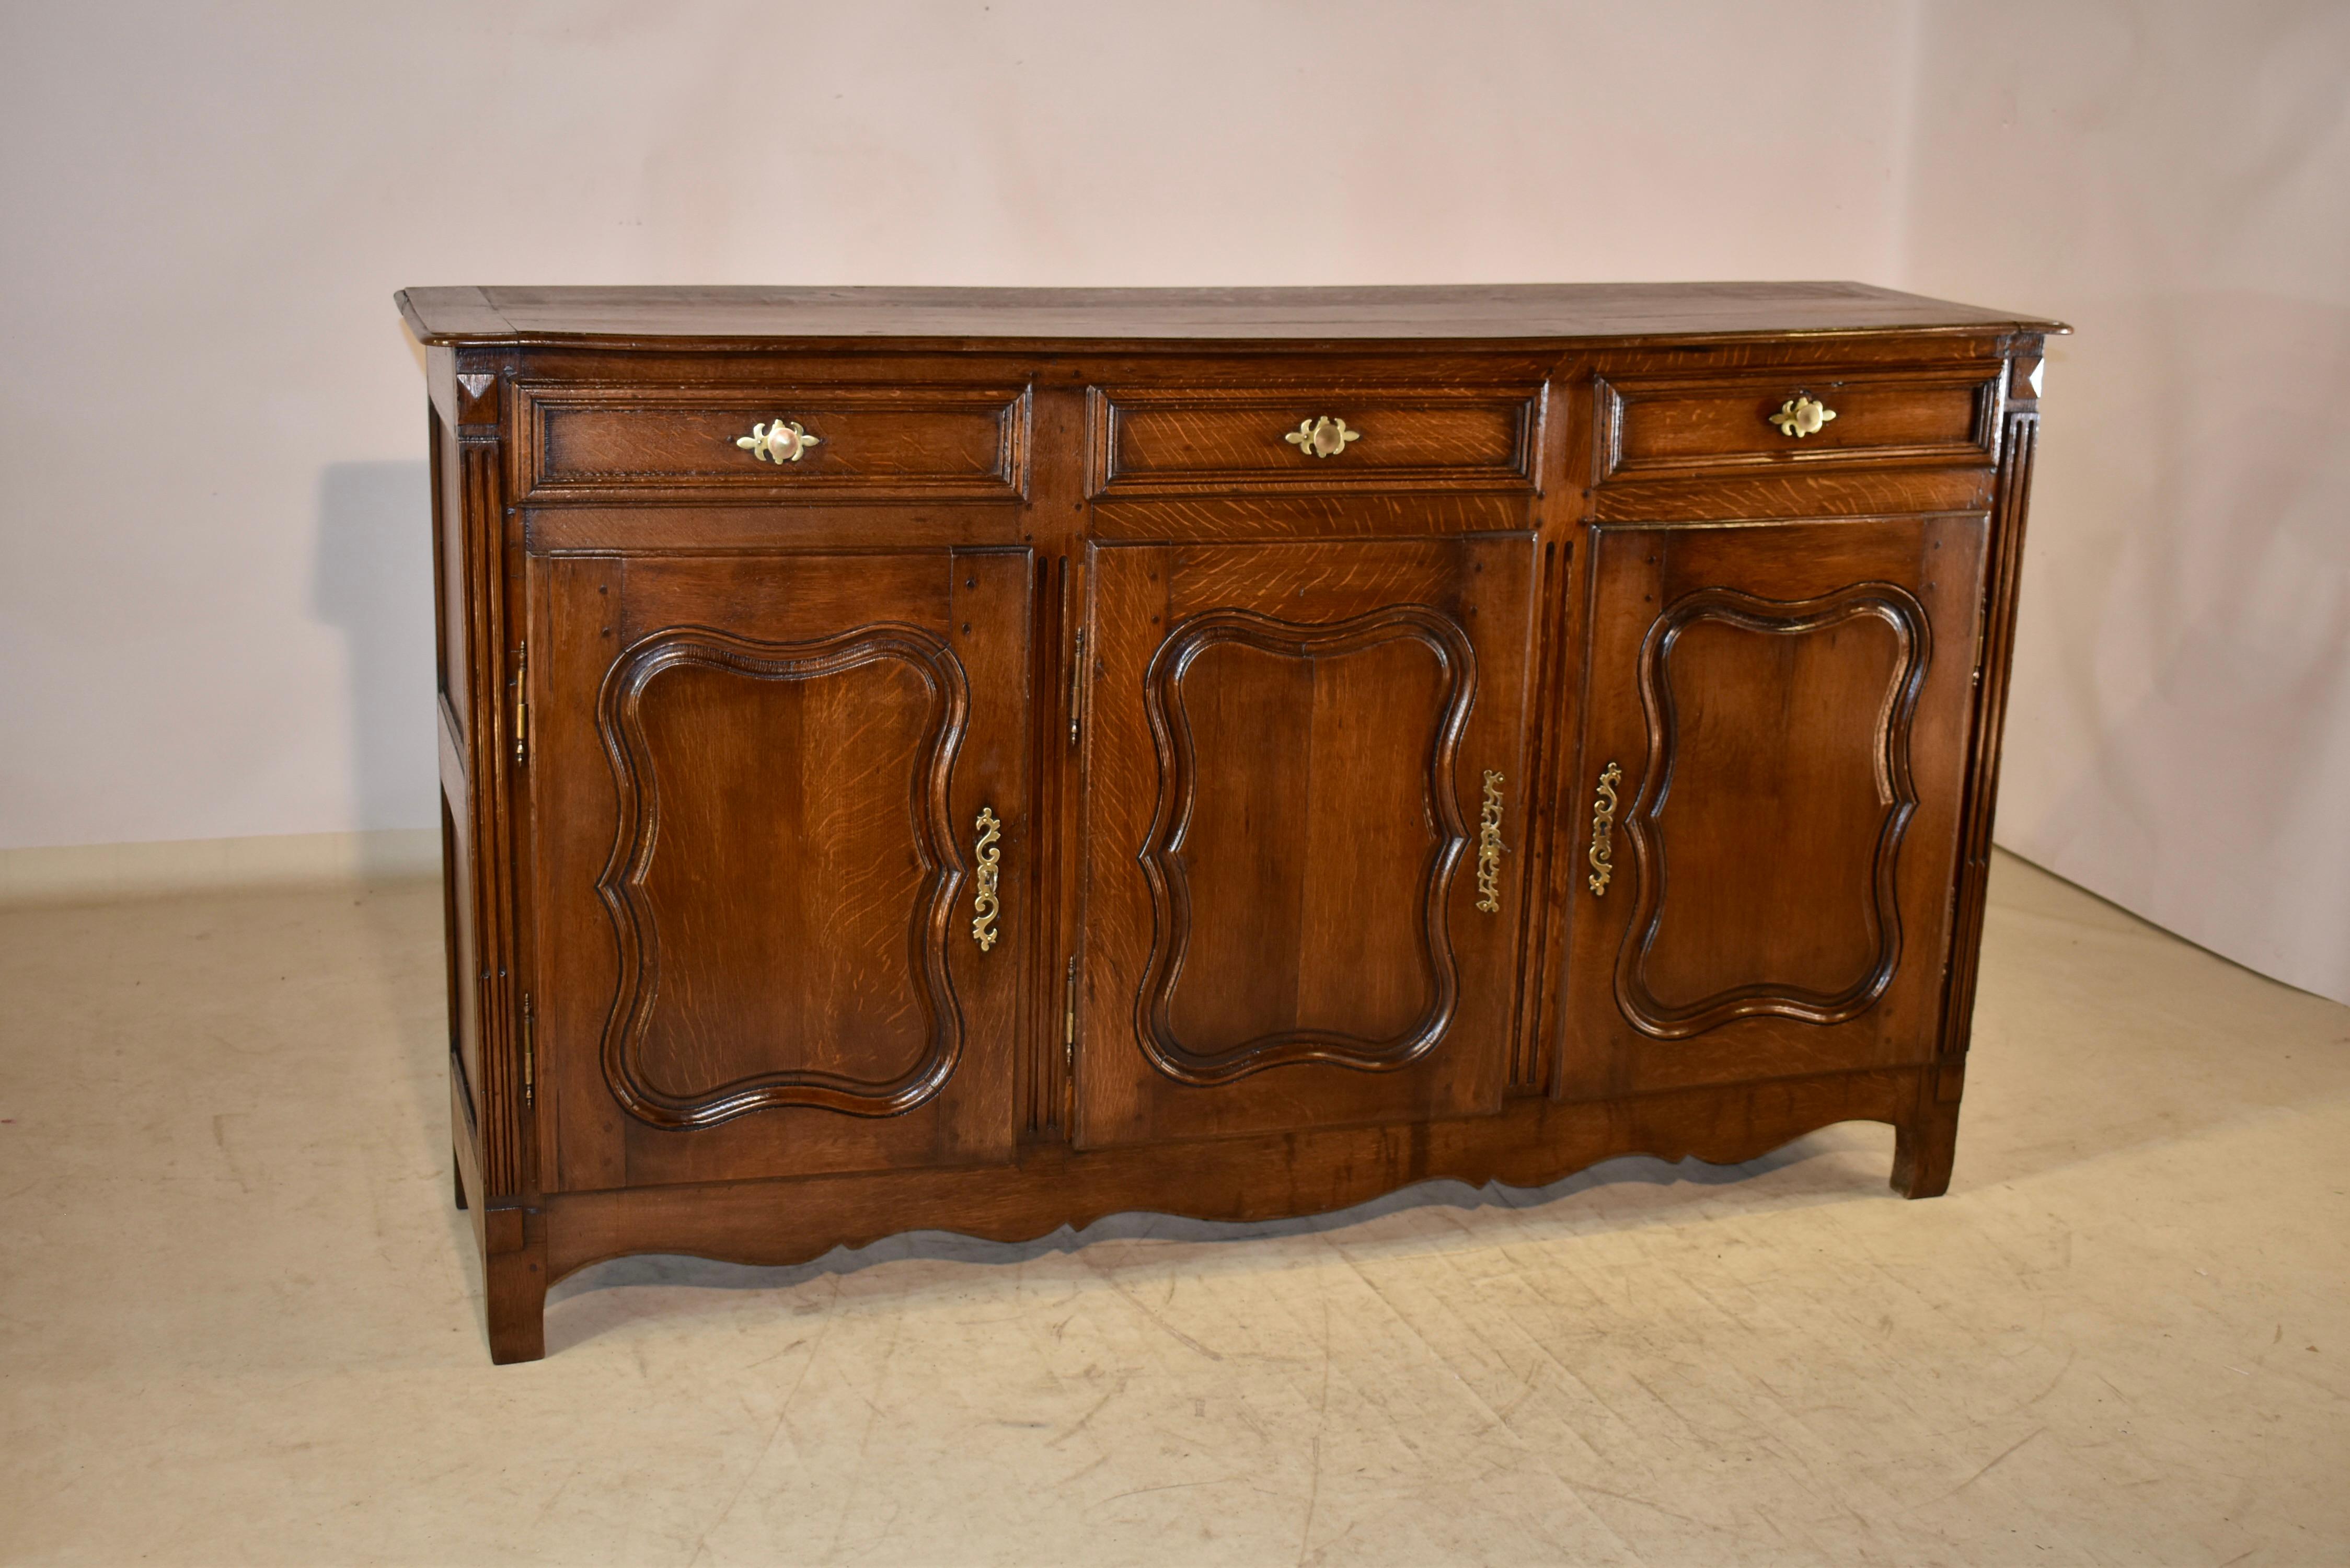 18th century oak enfilade from France with banded ends and beveled edges around the top. The sides are paneled and the front contains three paneled drawers over three raised paneled doors, which open to reveal storage. There is a scalloped skirt